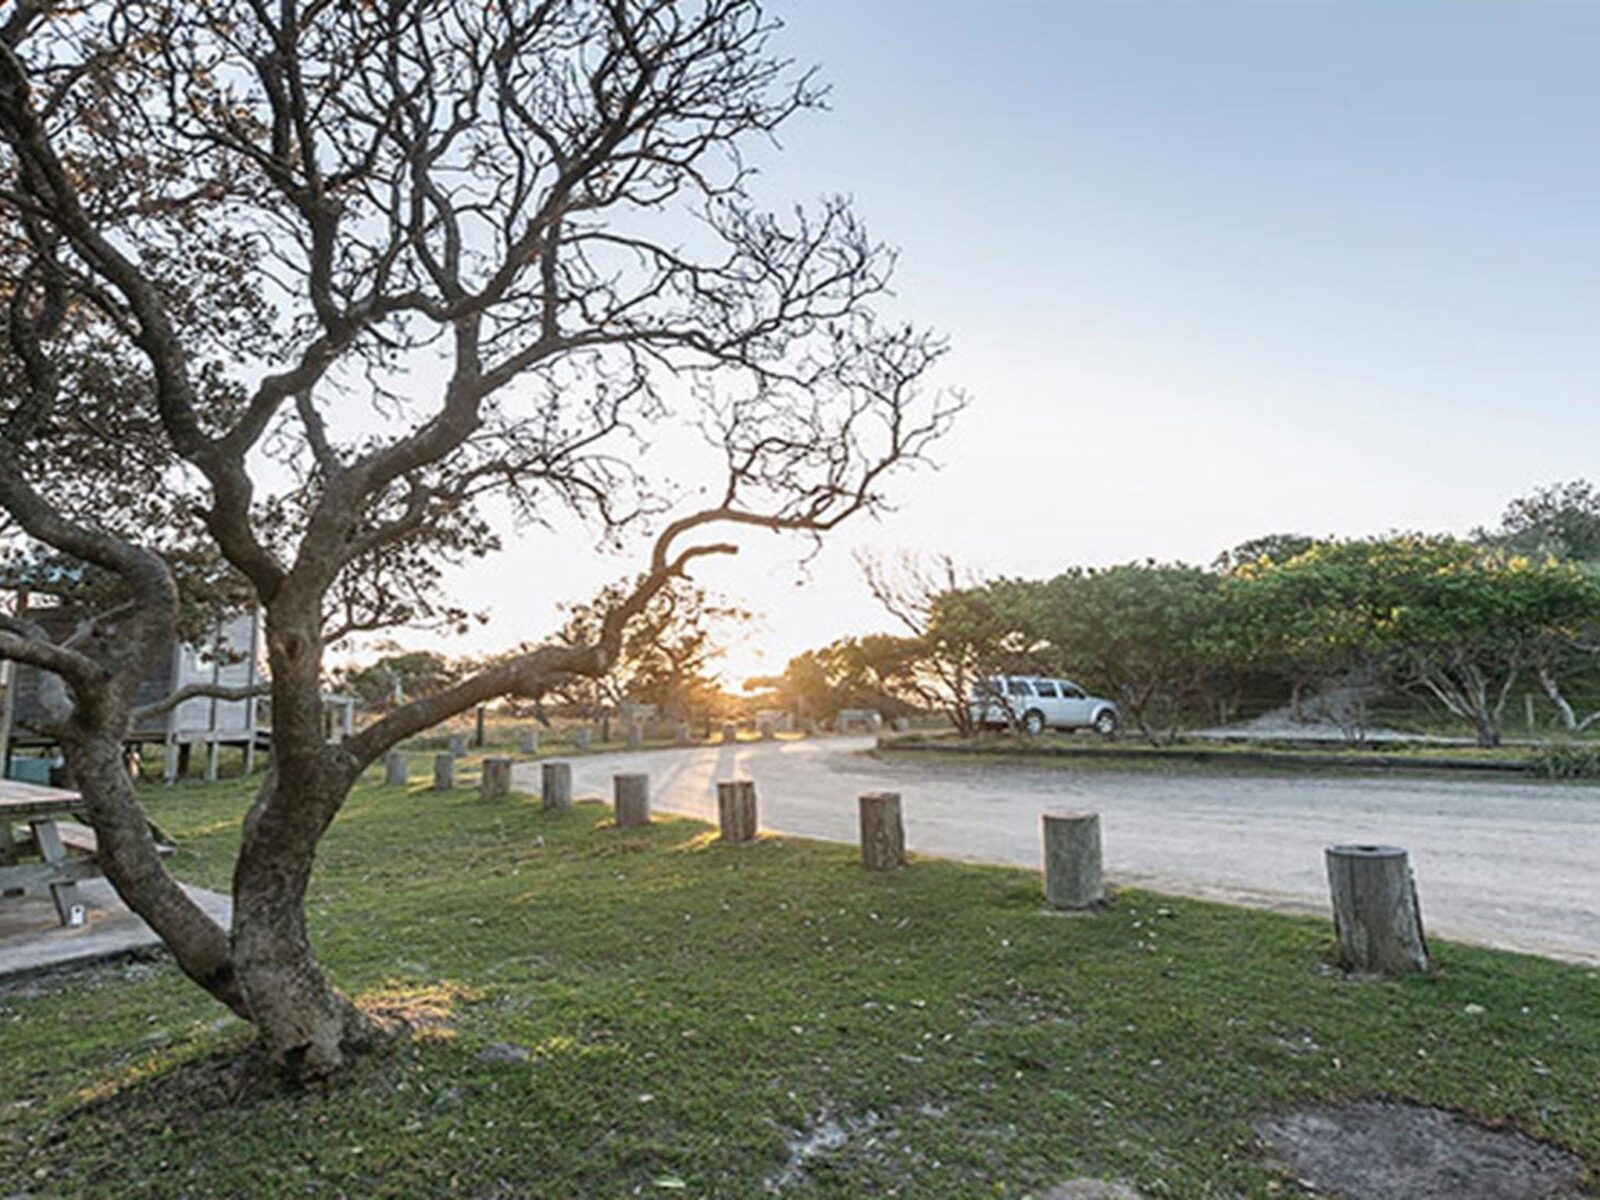 Sunrise over Broadwater Beach picnic area in Broadwater National Park. Photo: Murray Vanderveer